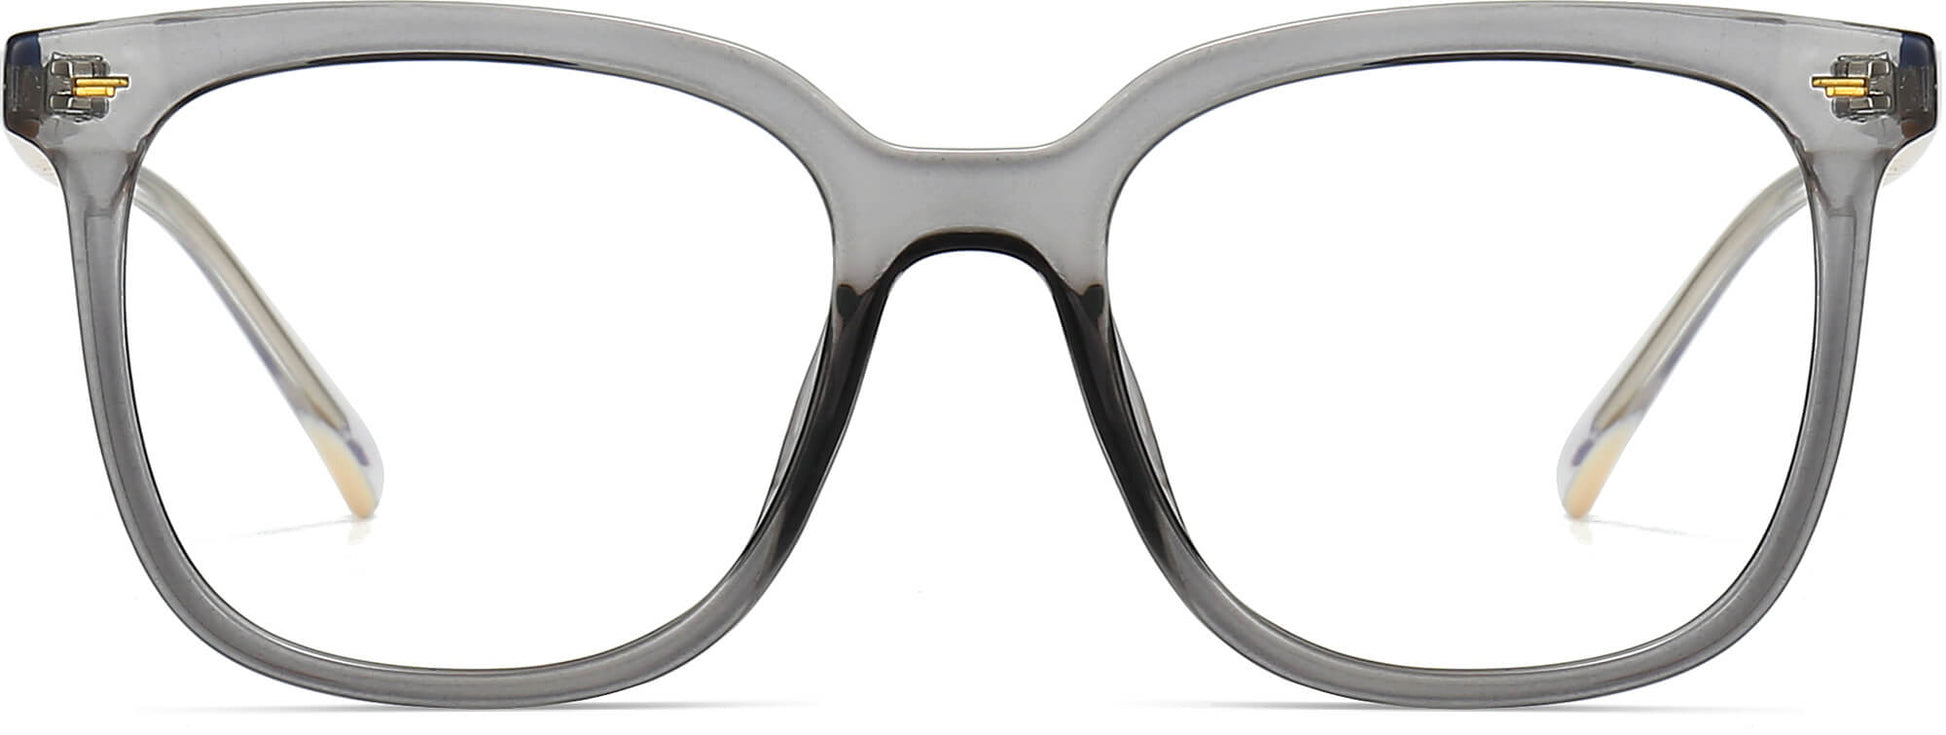 Oaklyn Square Gray Eyeglasses from ANRRI, front view